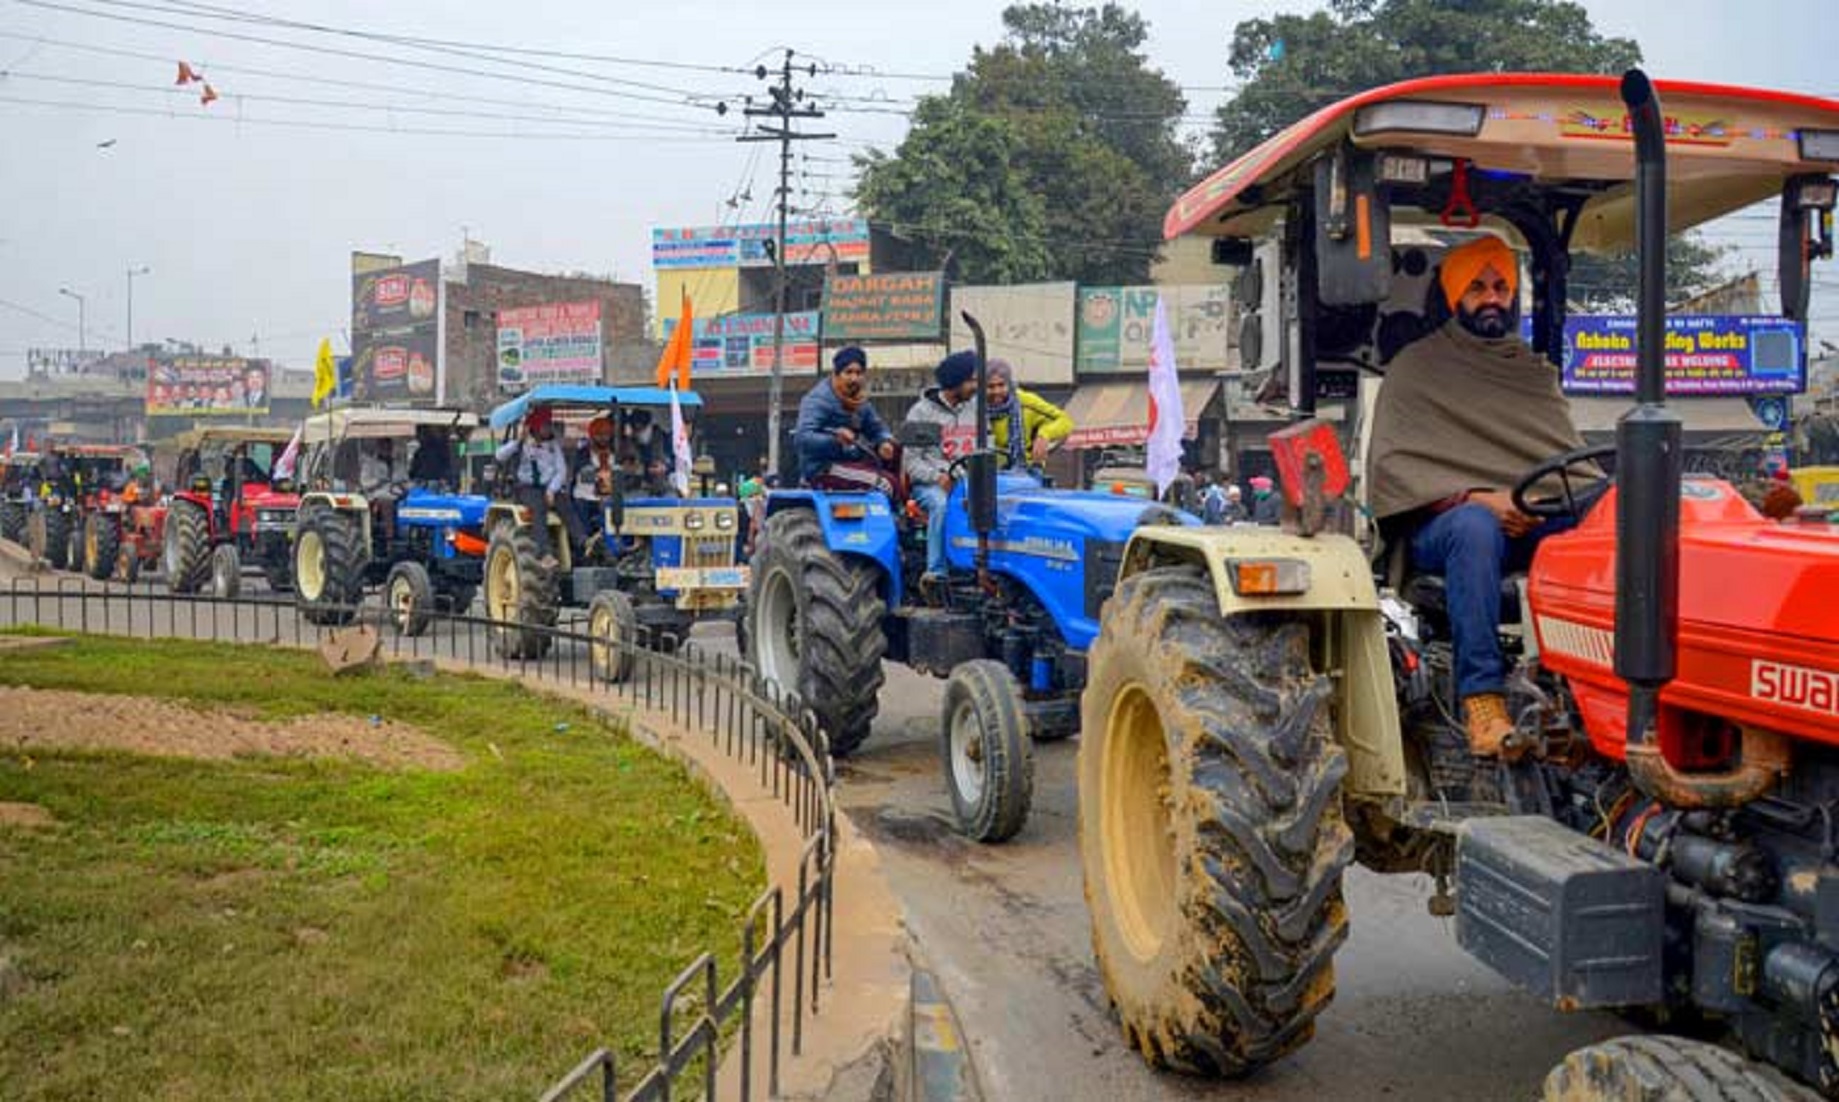 Police Gives Nod To Protesting Farmers’ Tractor Rally In Indian Capital On Republic Day